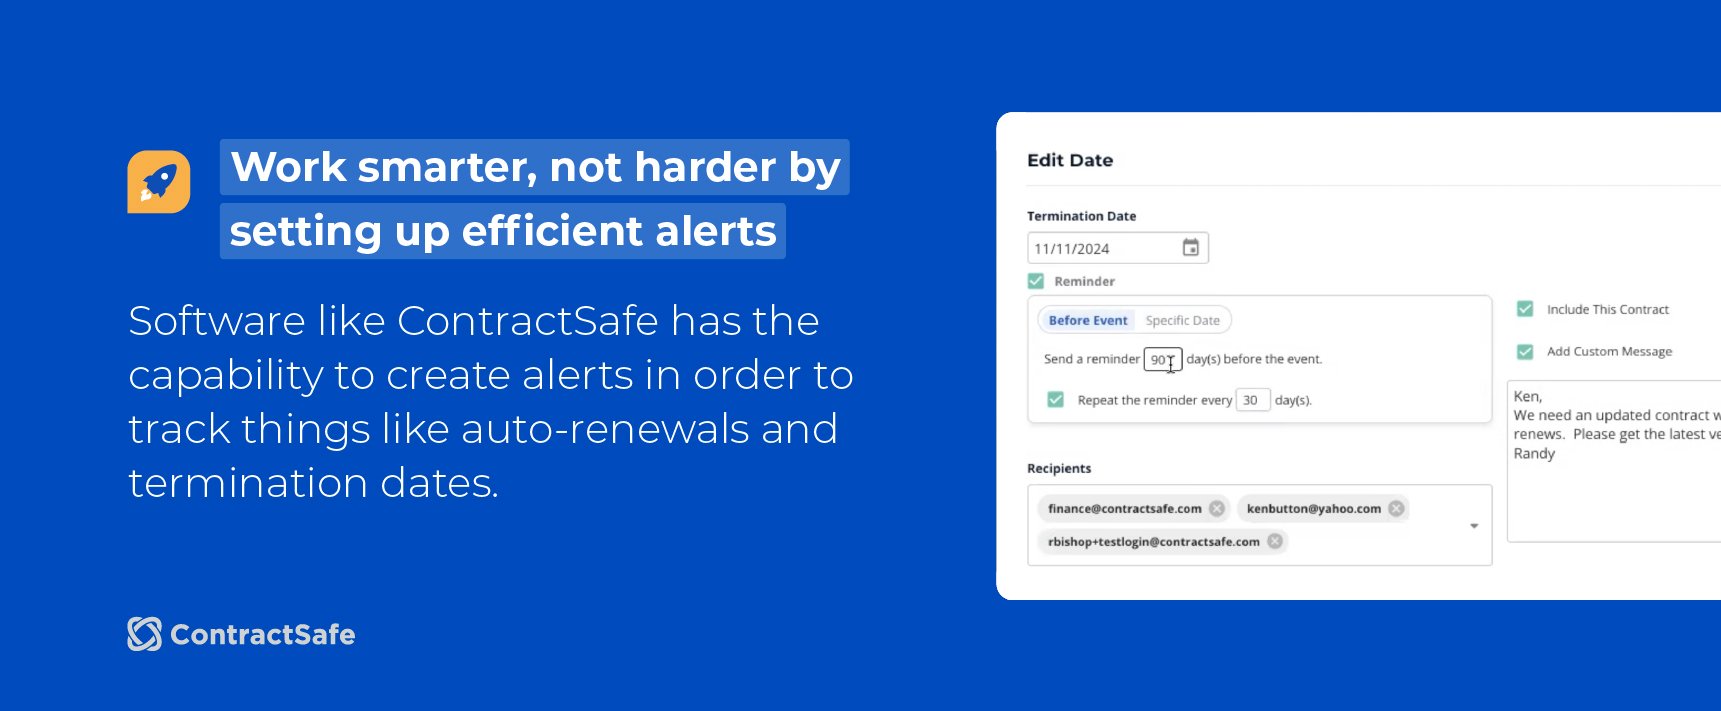 Work smarter, not harder by setting up efficient alerts. Software like ContractSafe has the capability to create alerts in order to track things like auto-renewals and termination dates.